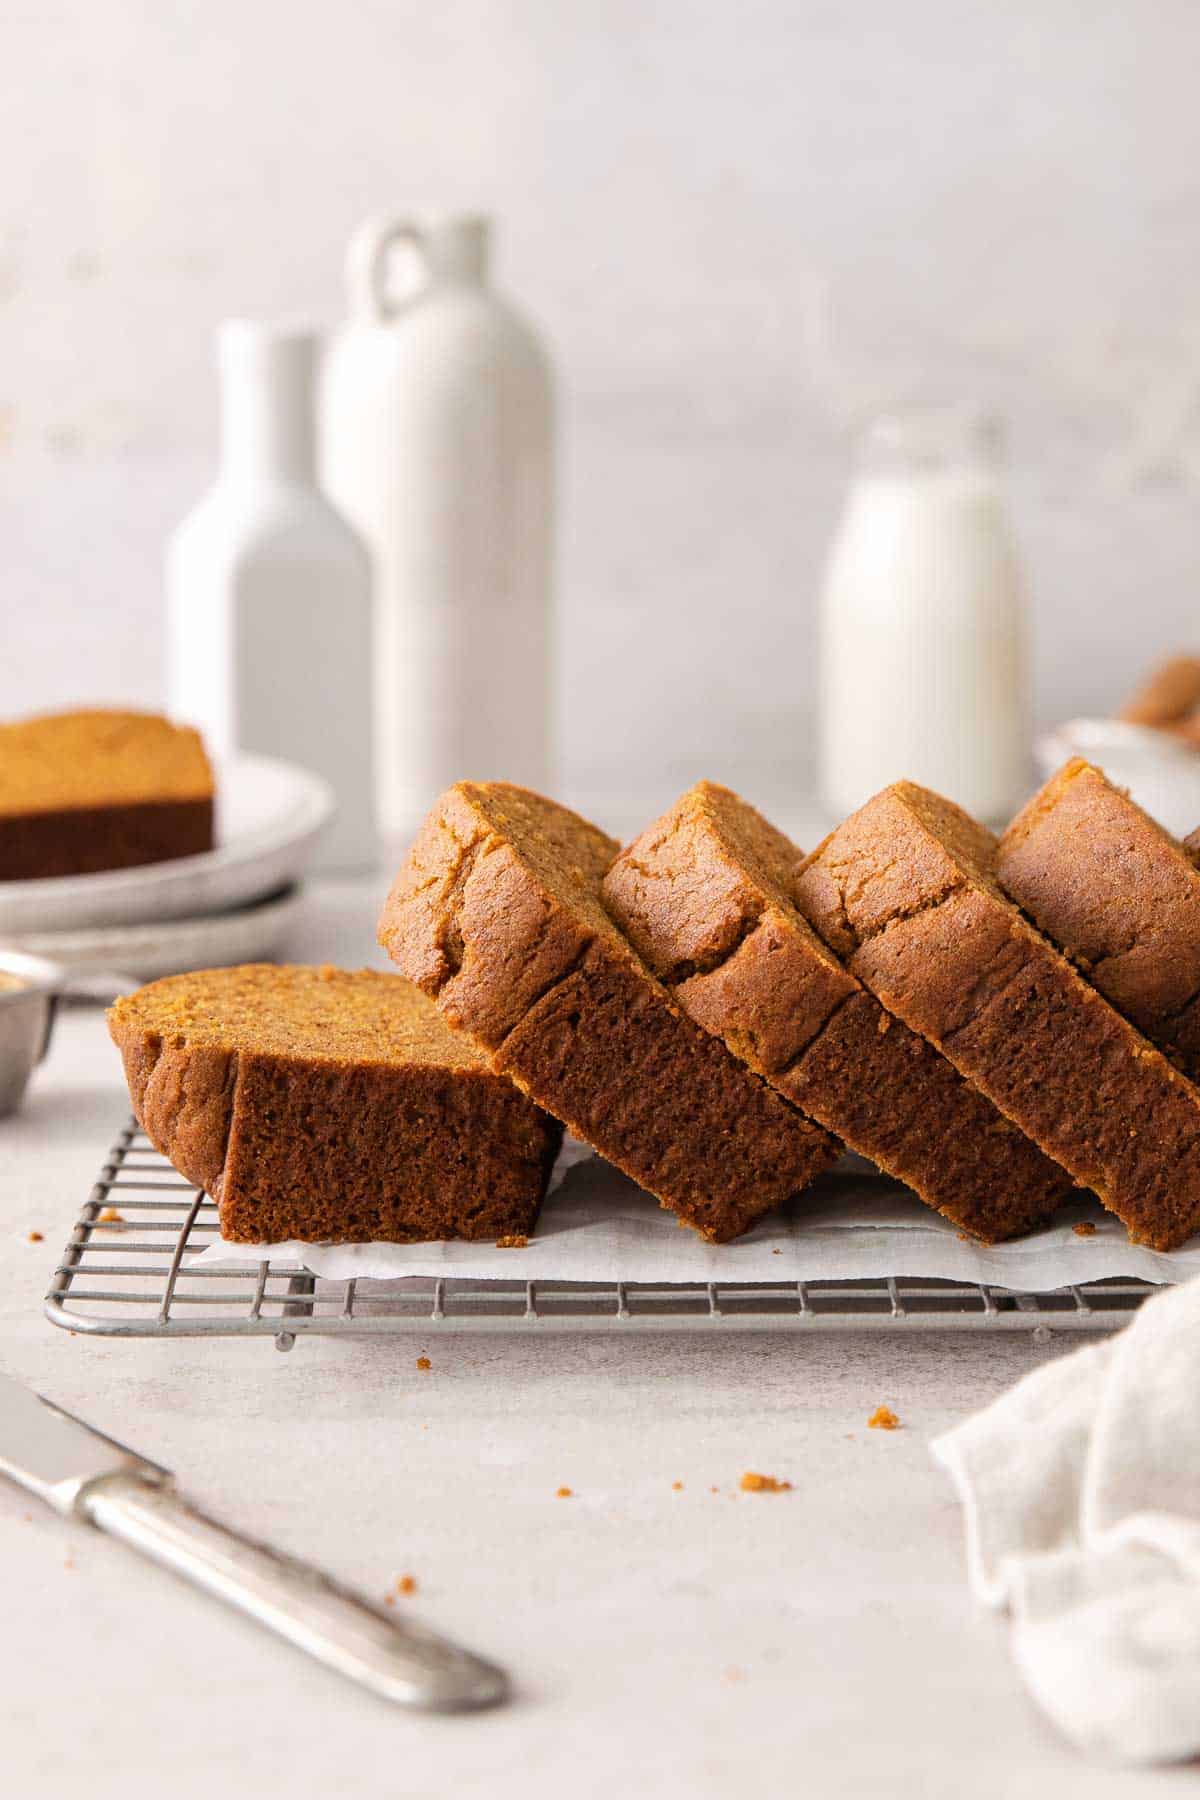 A side view of baked gluten-free pumpkin bread sliced on a wire rack